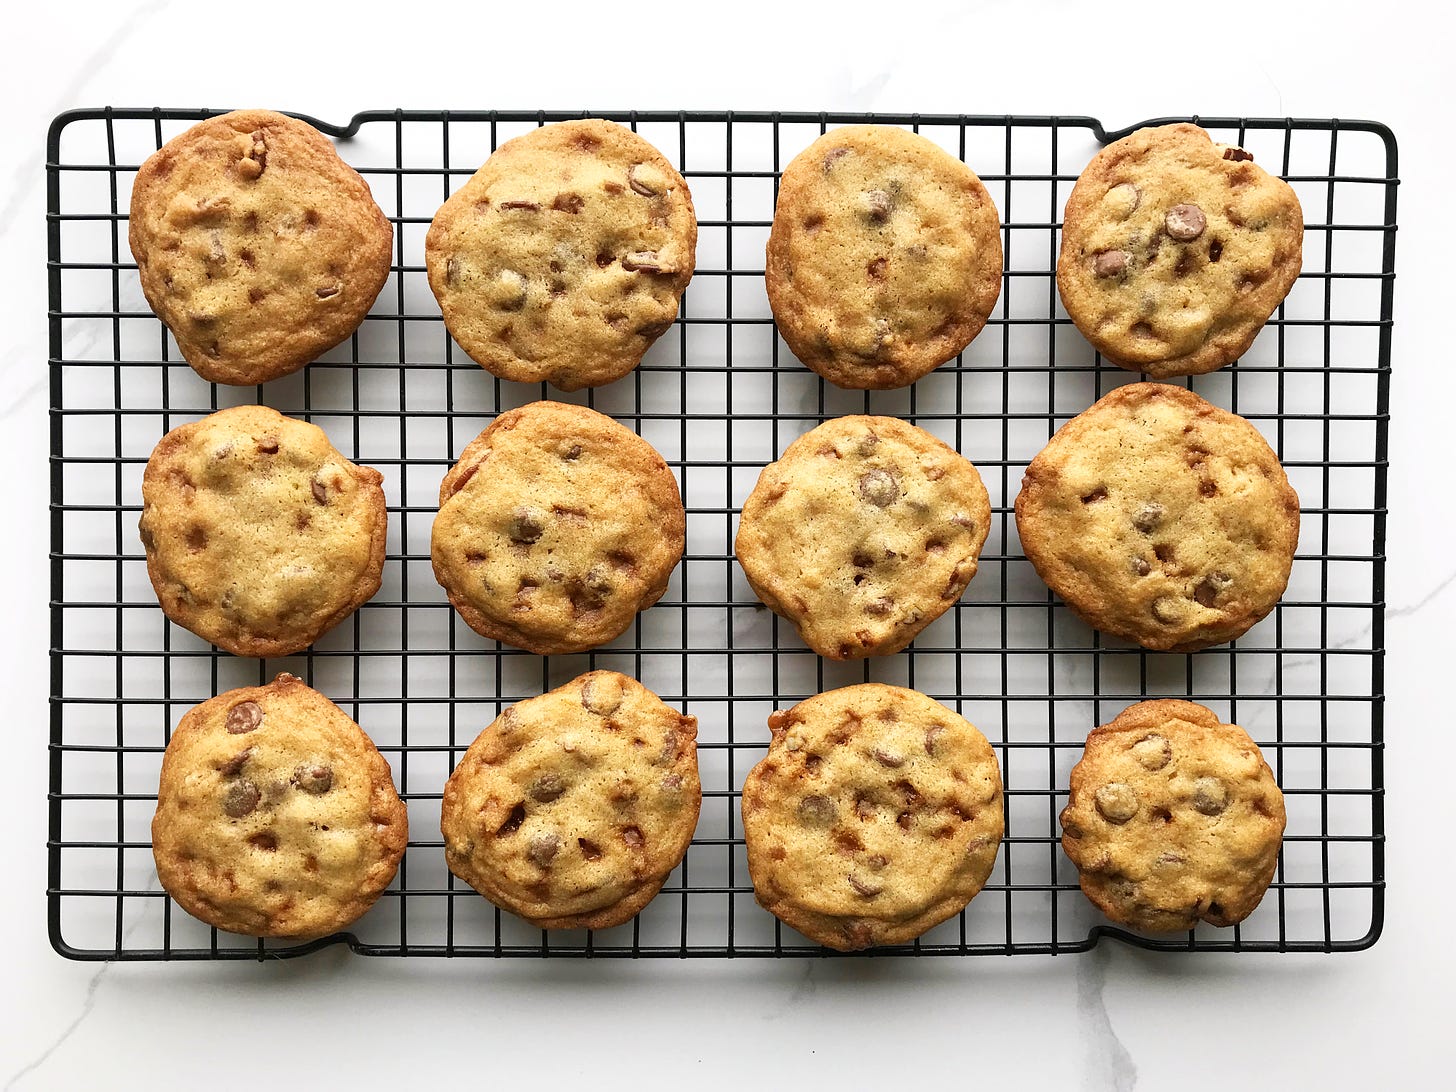 One dozen Chocolate Chip Cookie with Toffee and Pecans on a rectangular black wire cooling rack. Each cookie is different, some with more chocolate chips, others with an extra nut or two, some have little craters where the toffee bits have melted. Their edges are a golden brown while the centres are paler.